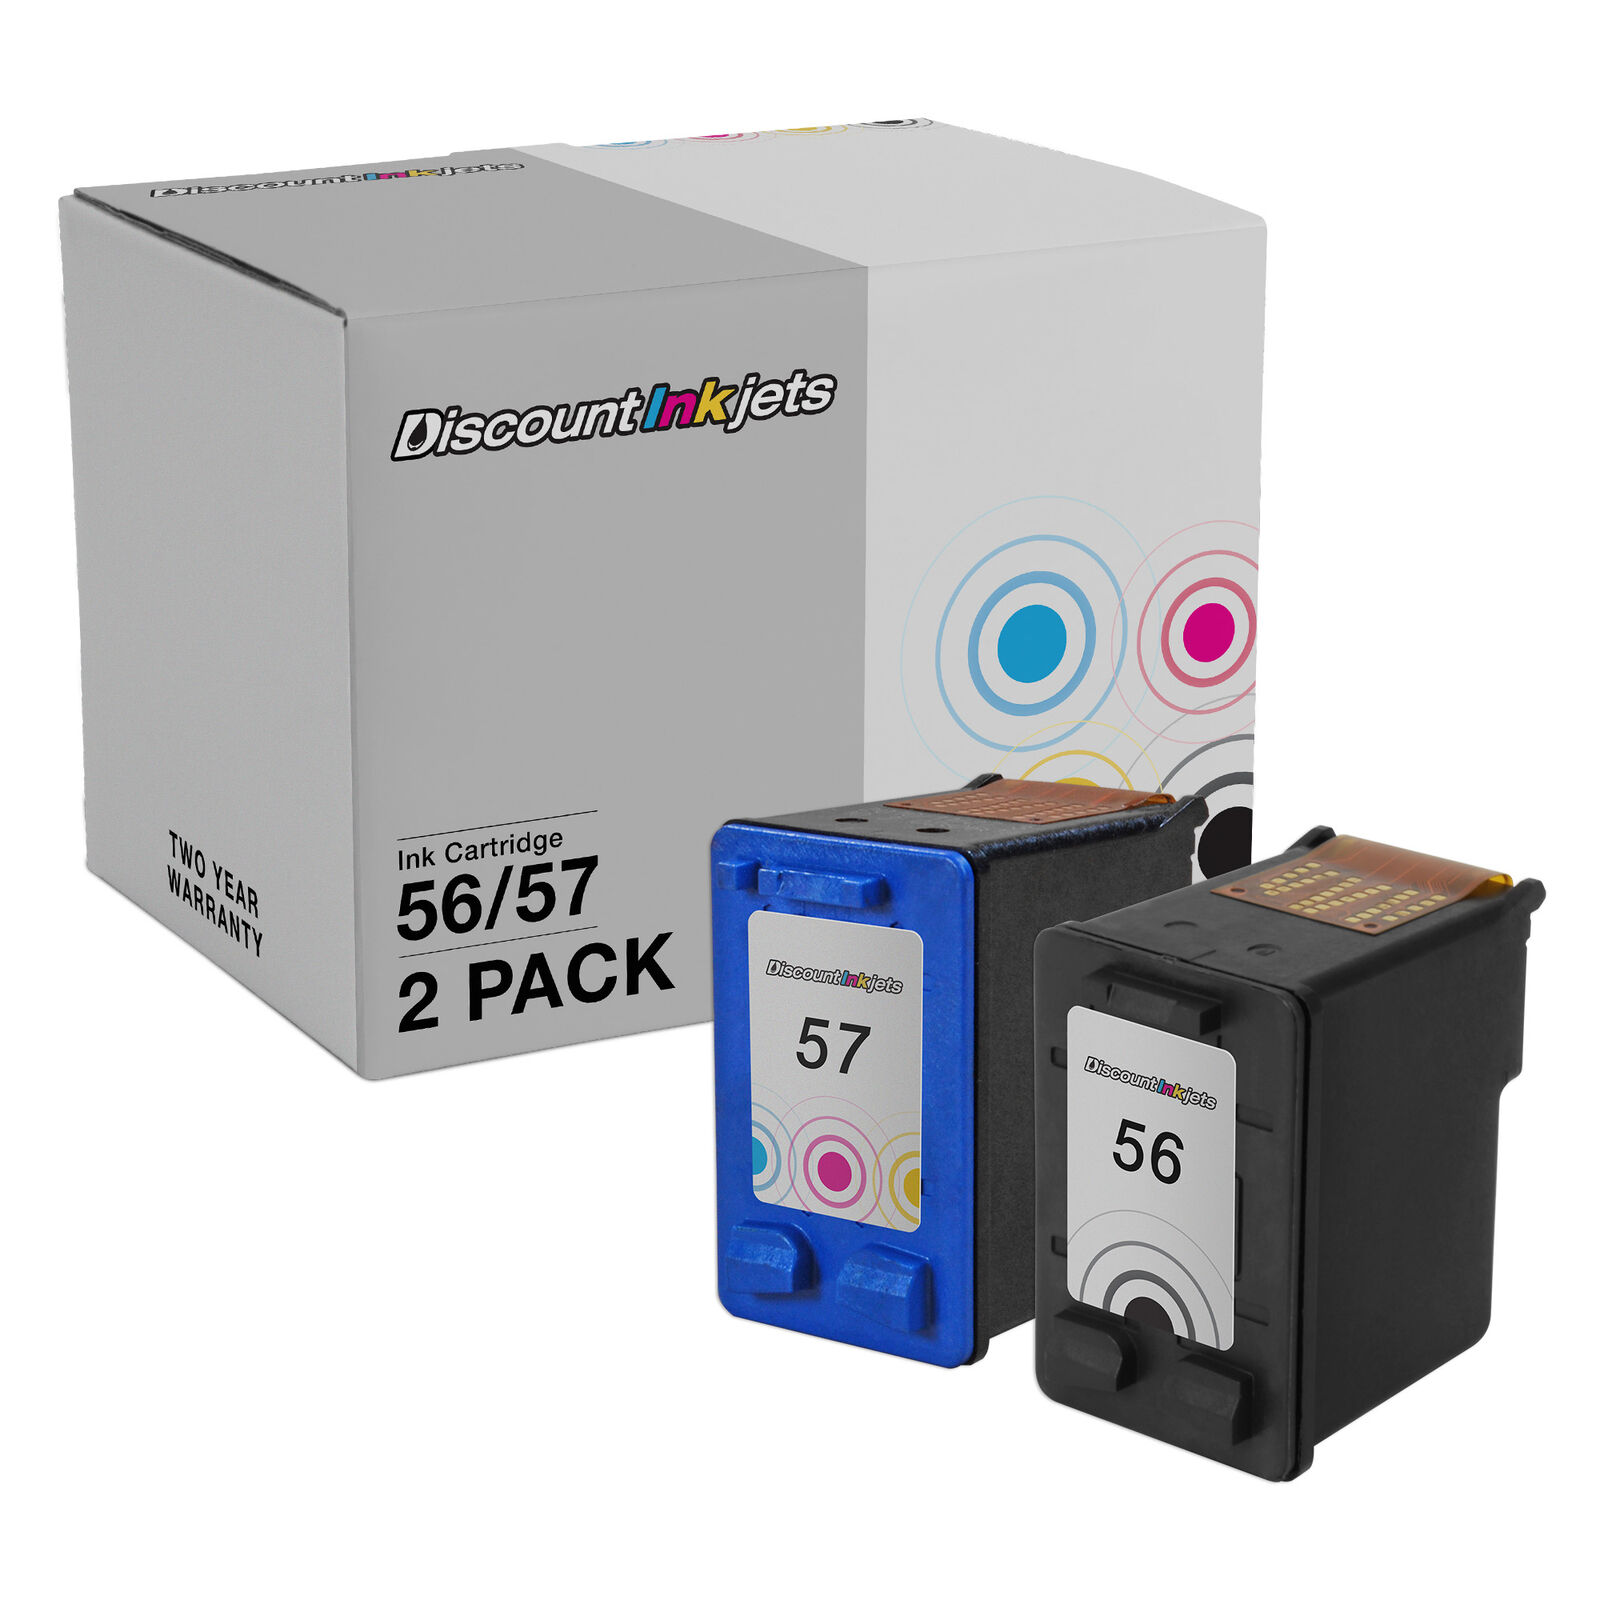 Ink Cartridge Replacement for HP 56 & HP 57 (1 Black, 1 Color, 2-Pack)